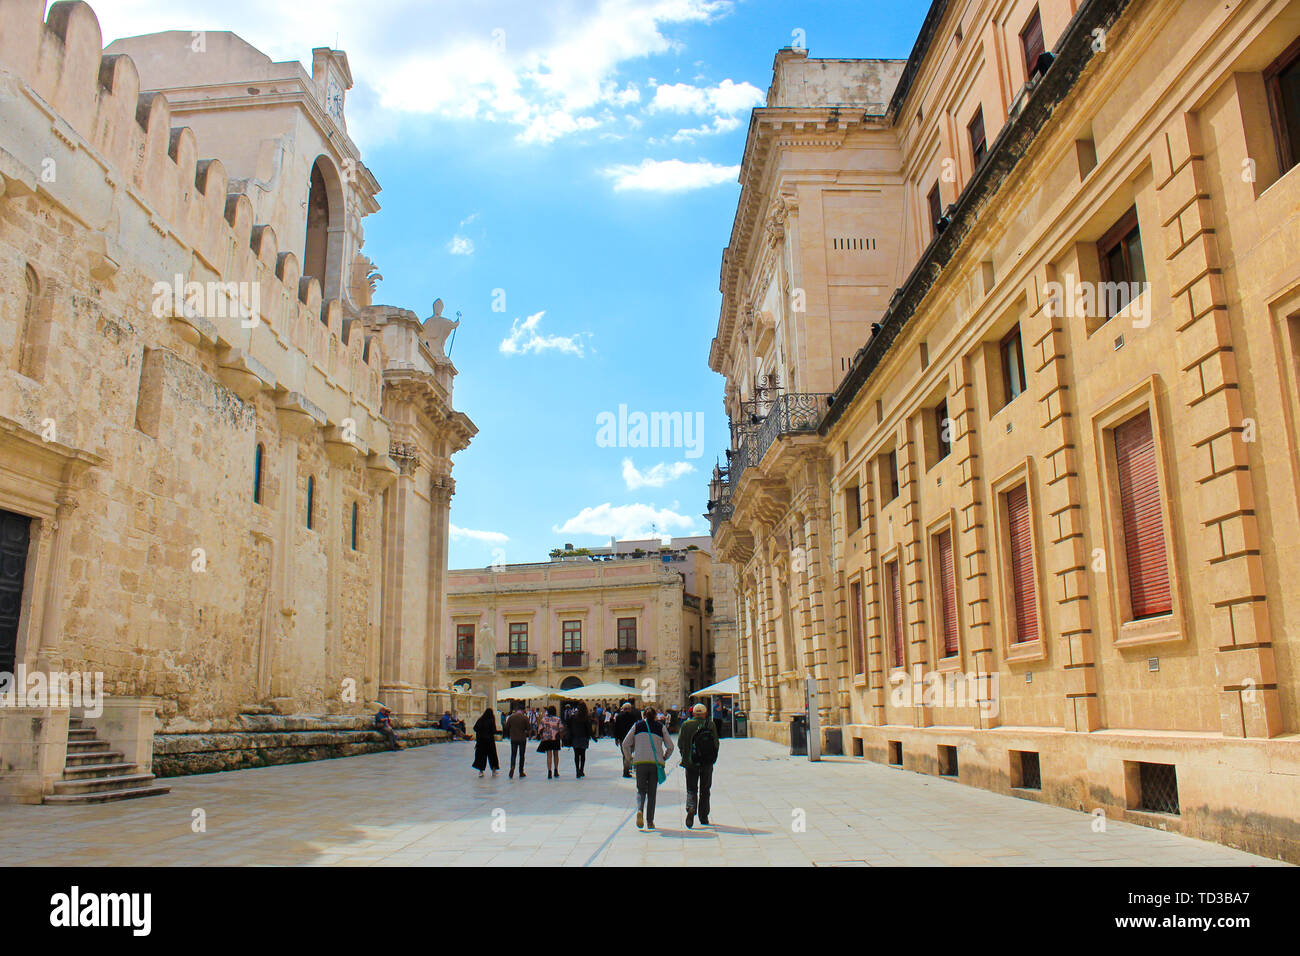 Syracuse, Italy - Apr 10th 2019: People walking to the Piazza Duomo Square along beautiful Roman Catholic Cathedral of Syracuse in Ortigia Island, Sicily, Italy. Popular tourist place. Stock Photo